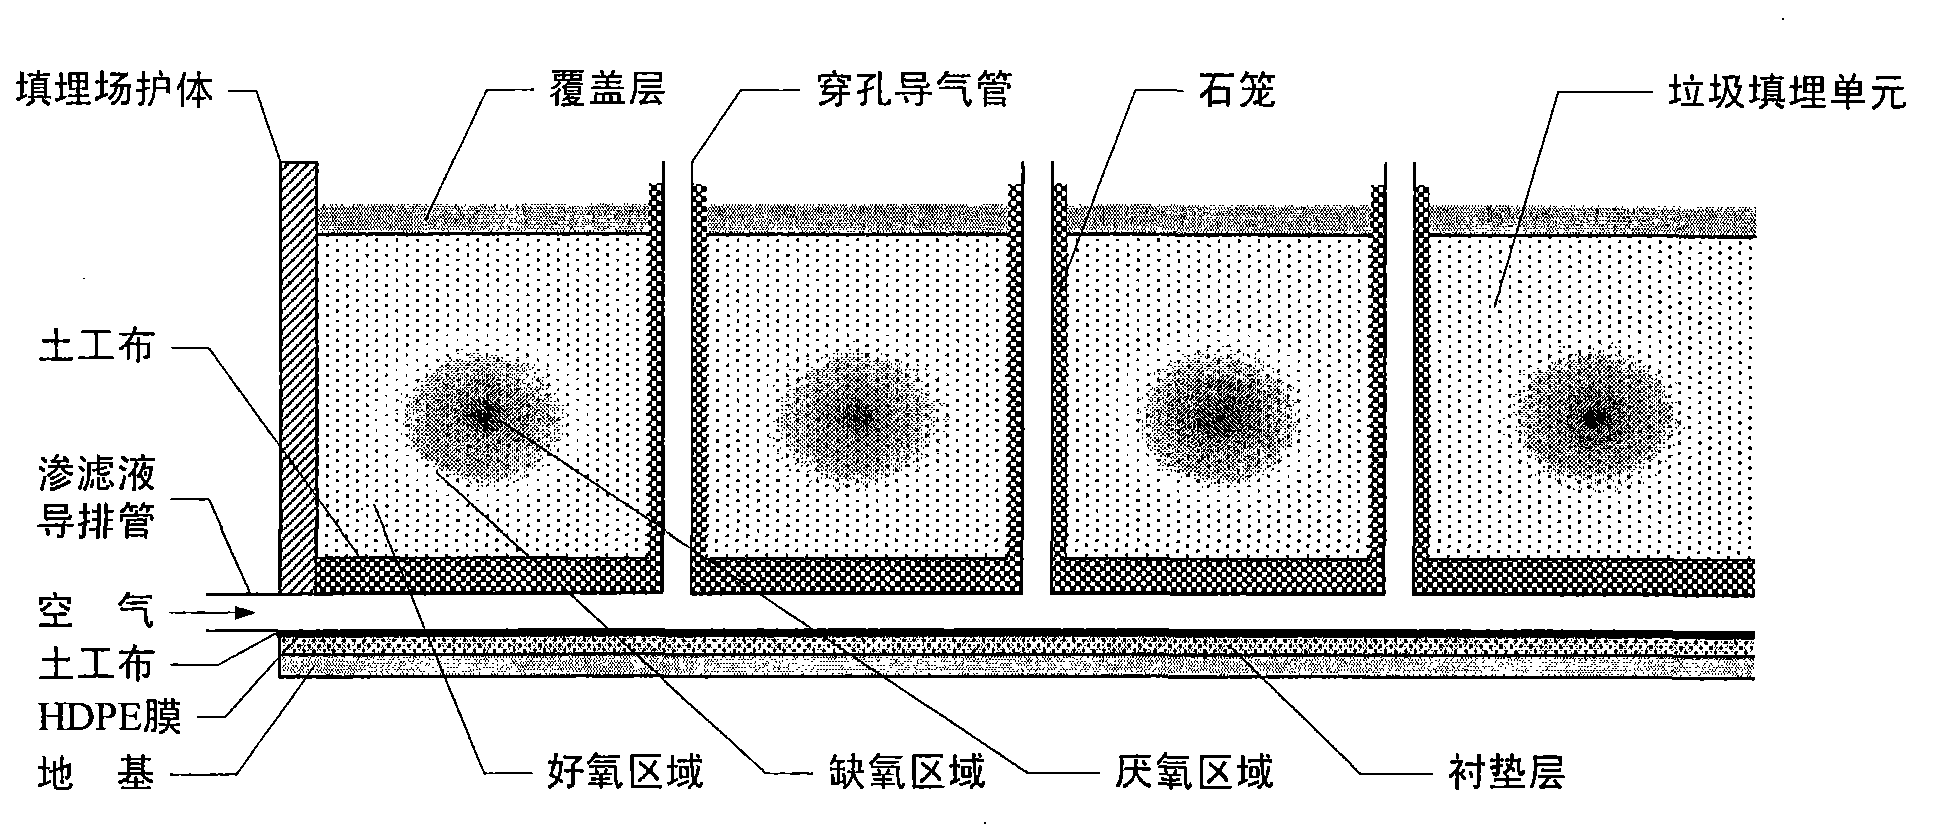 Improved urban domestic garbage landfilling structure and landfilling treatment method